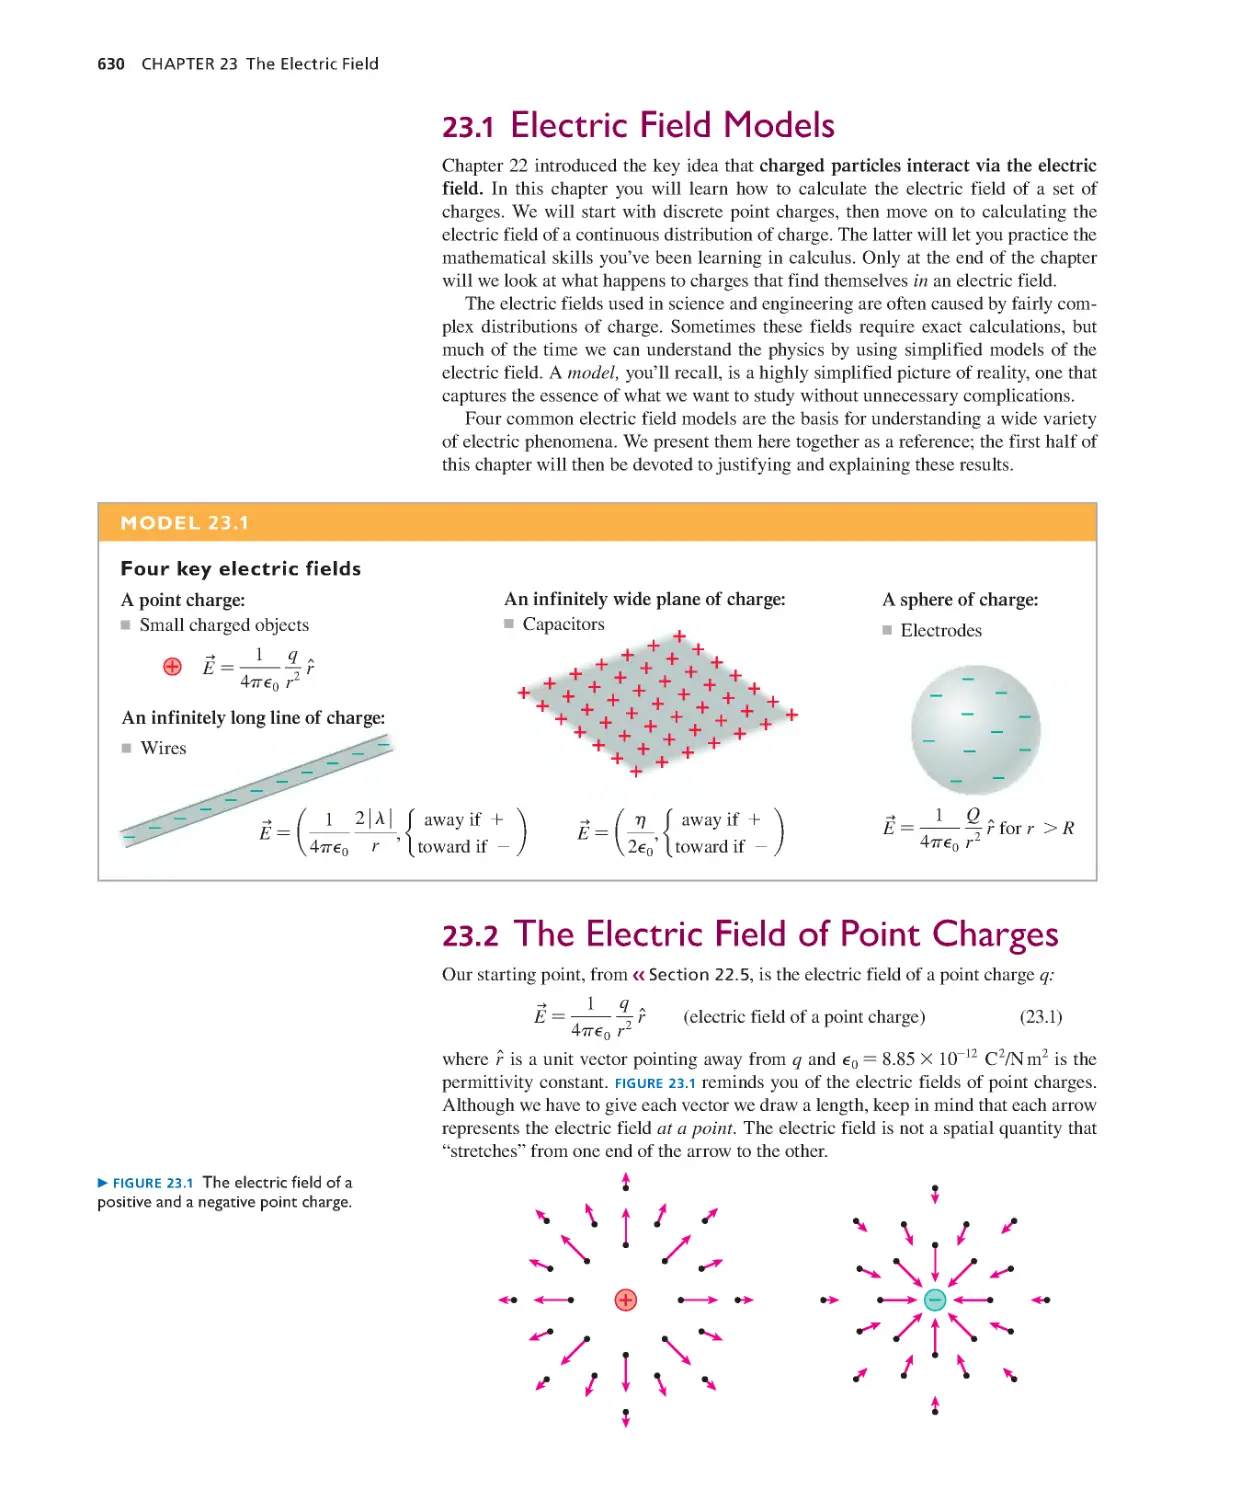 23.2. The Electric Field of Point Charges